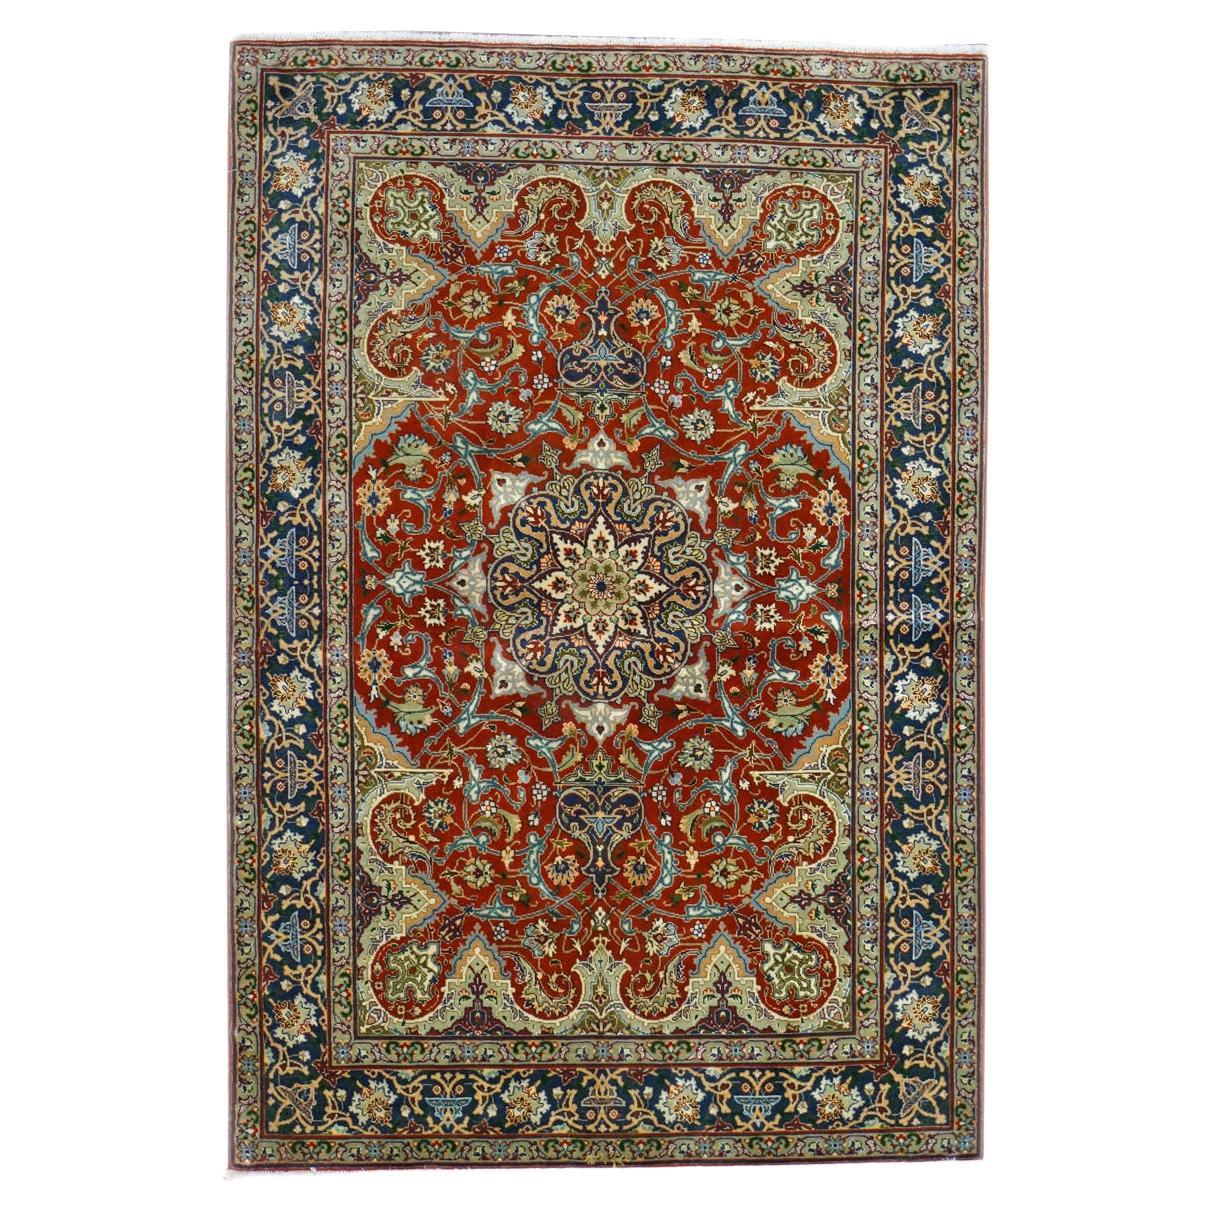 Antique 1940s Fine Persian Tabriz 3x4 Red, Navy, & Blue Handmade Area Rug For Sale